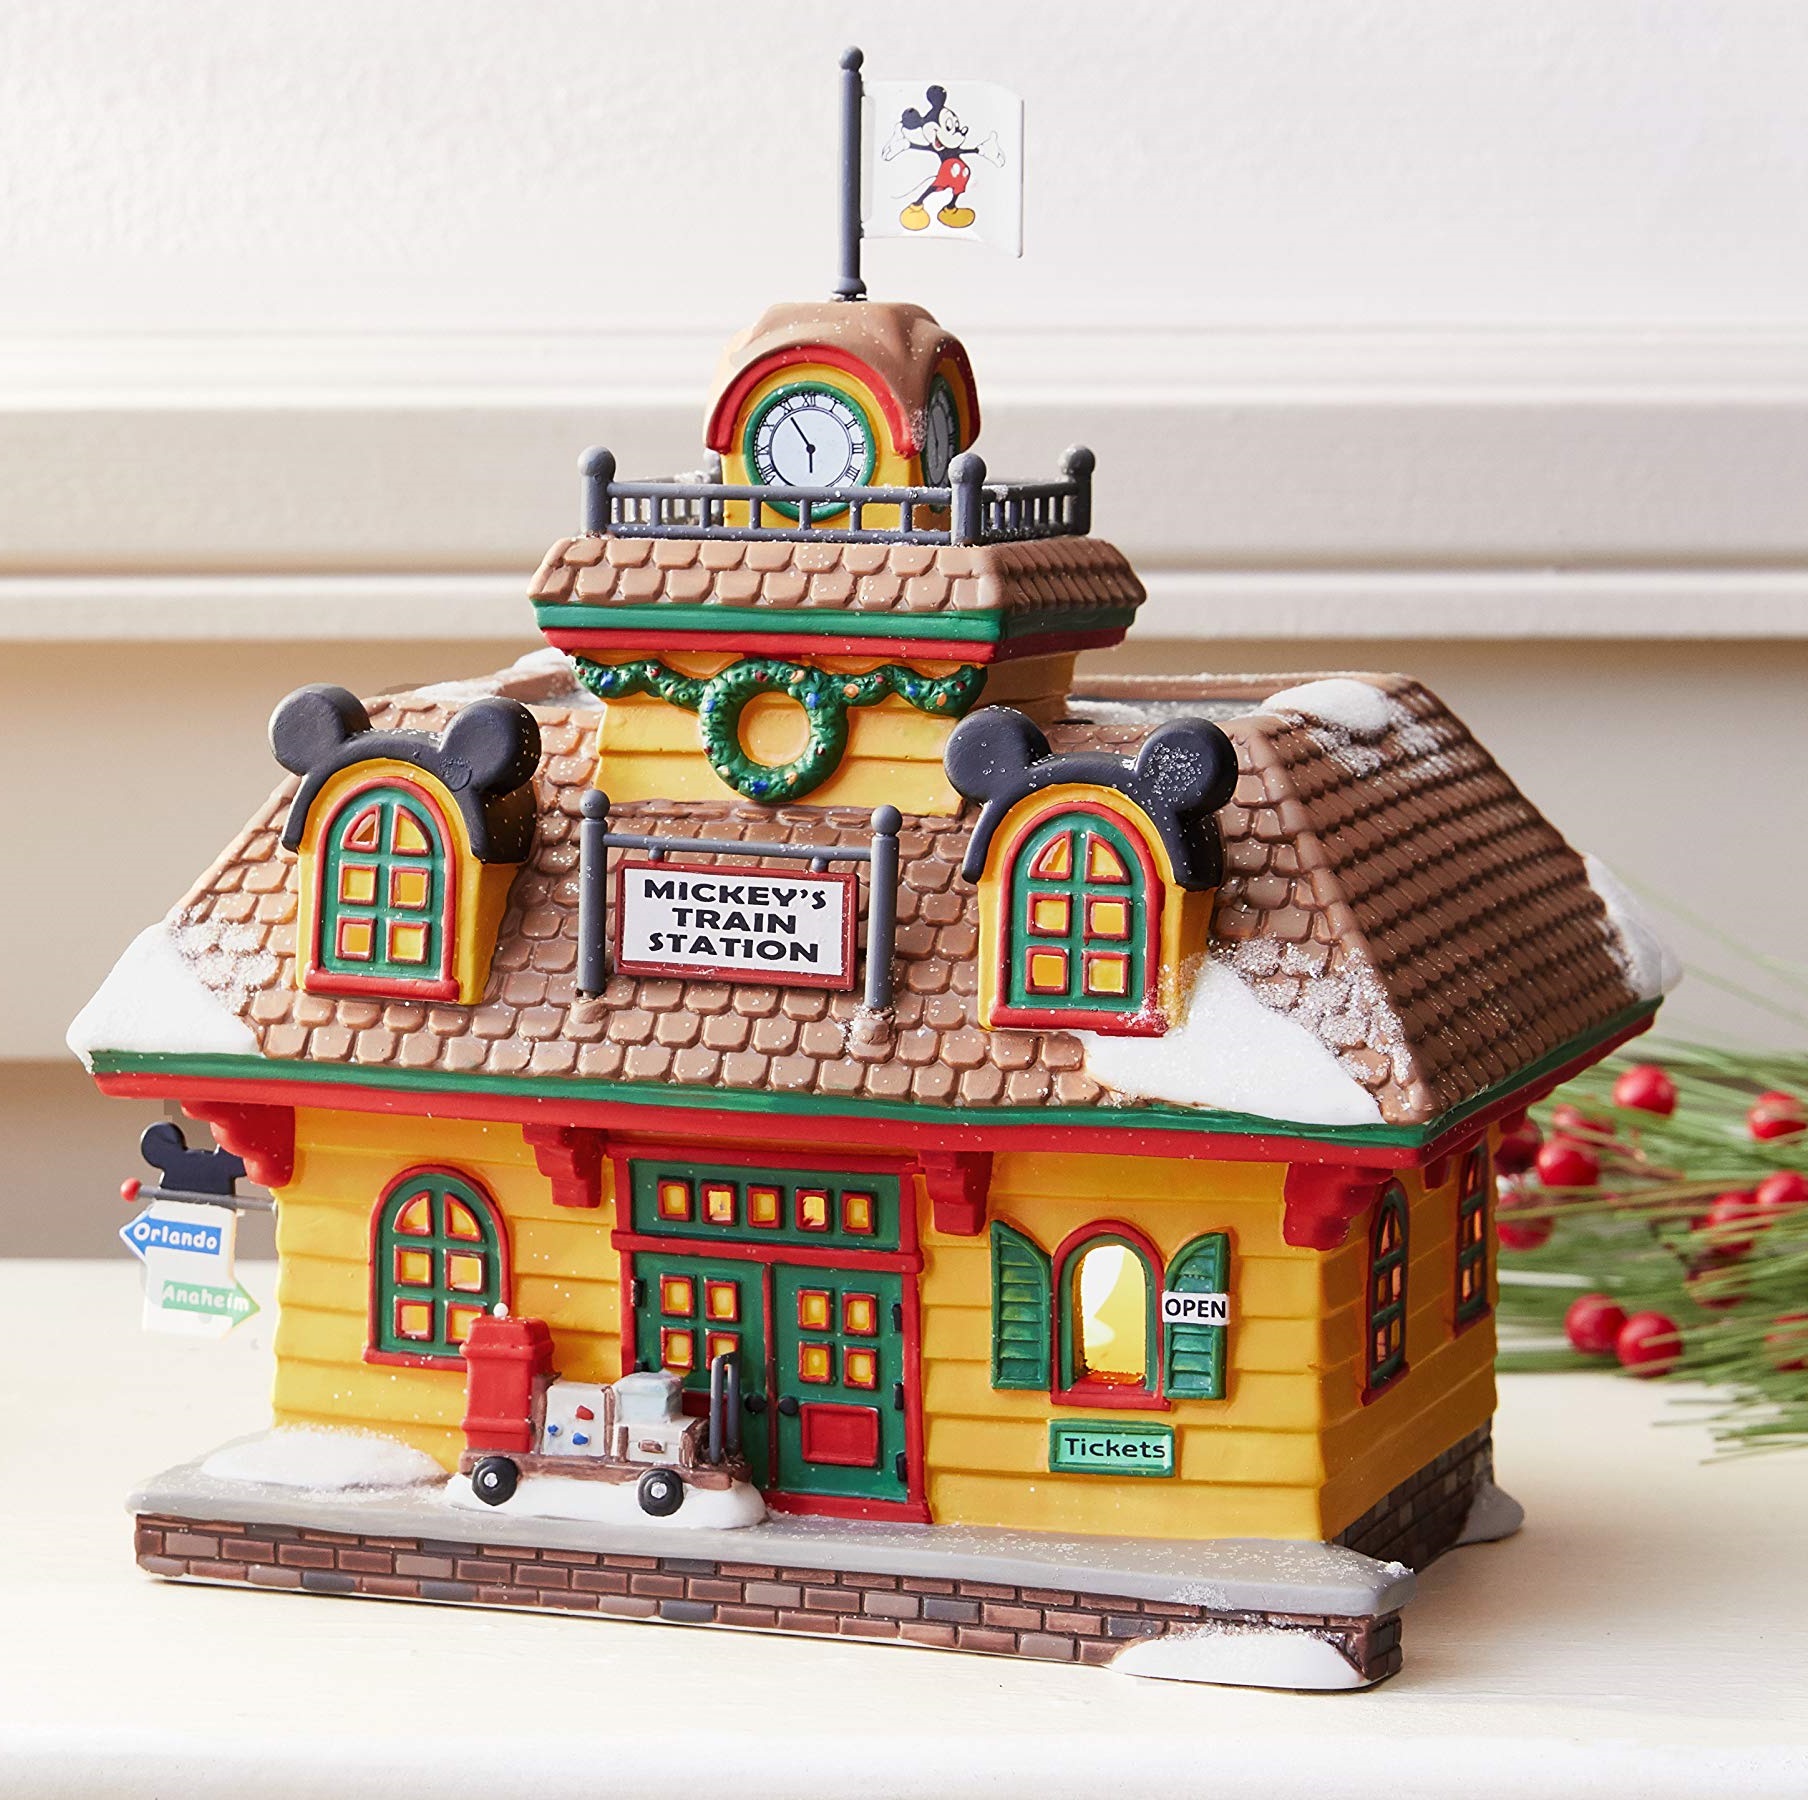 Department 56 Disney Village Mickey's Train Station #4032203 - Click Image to Close